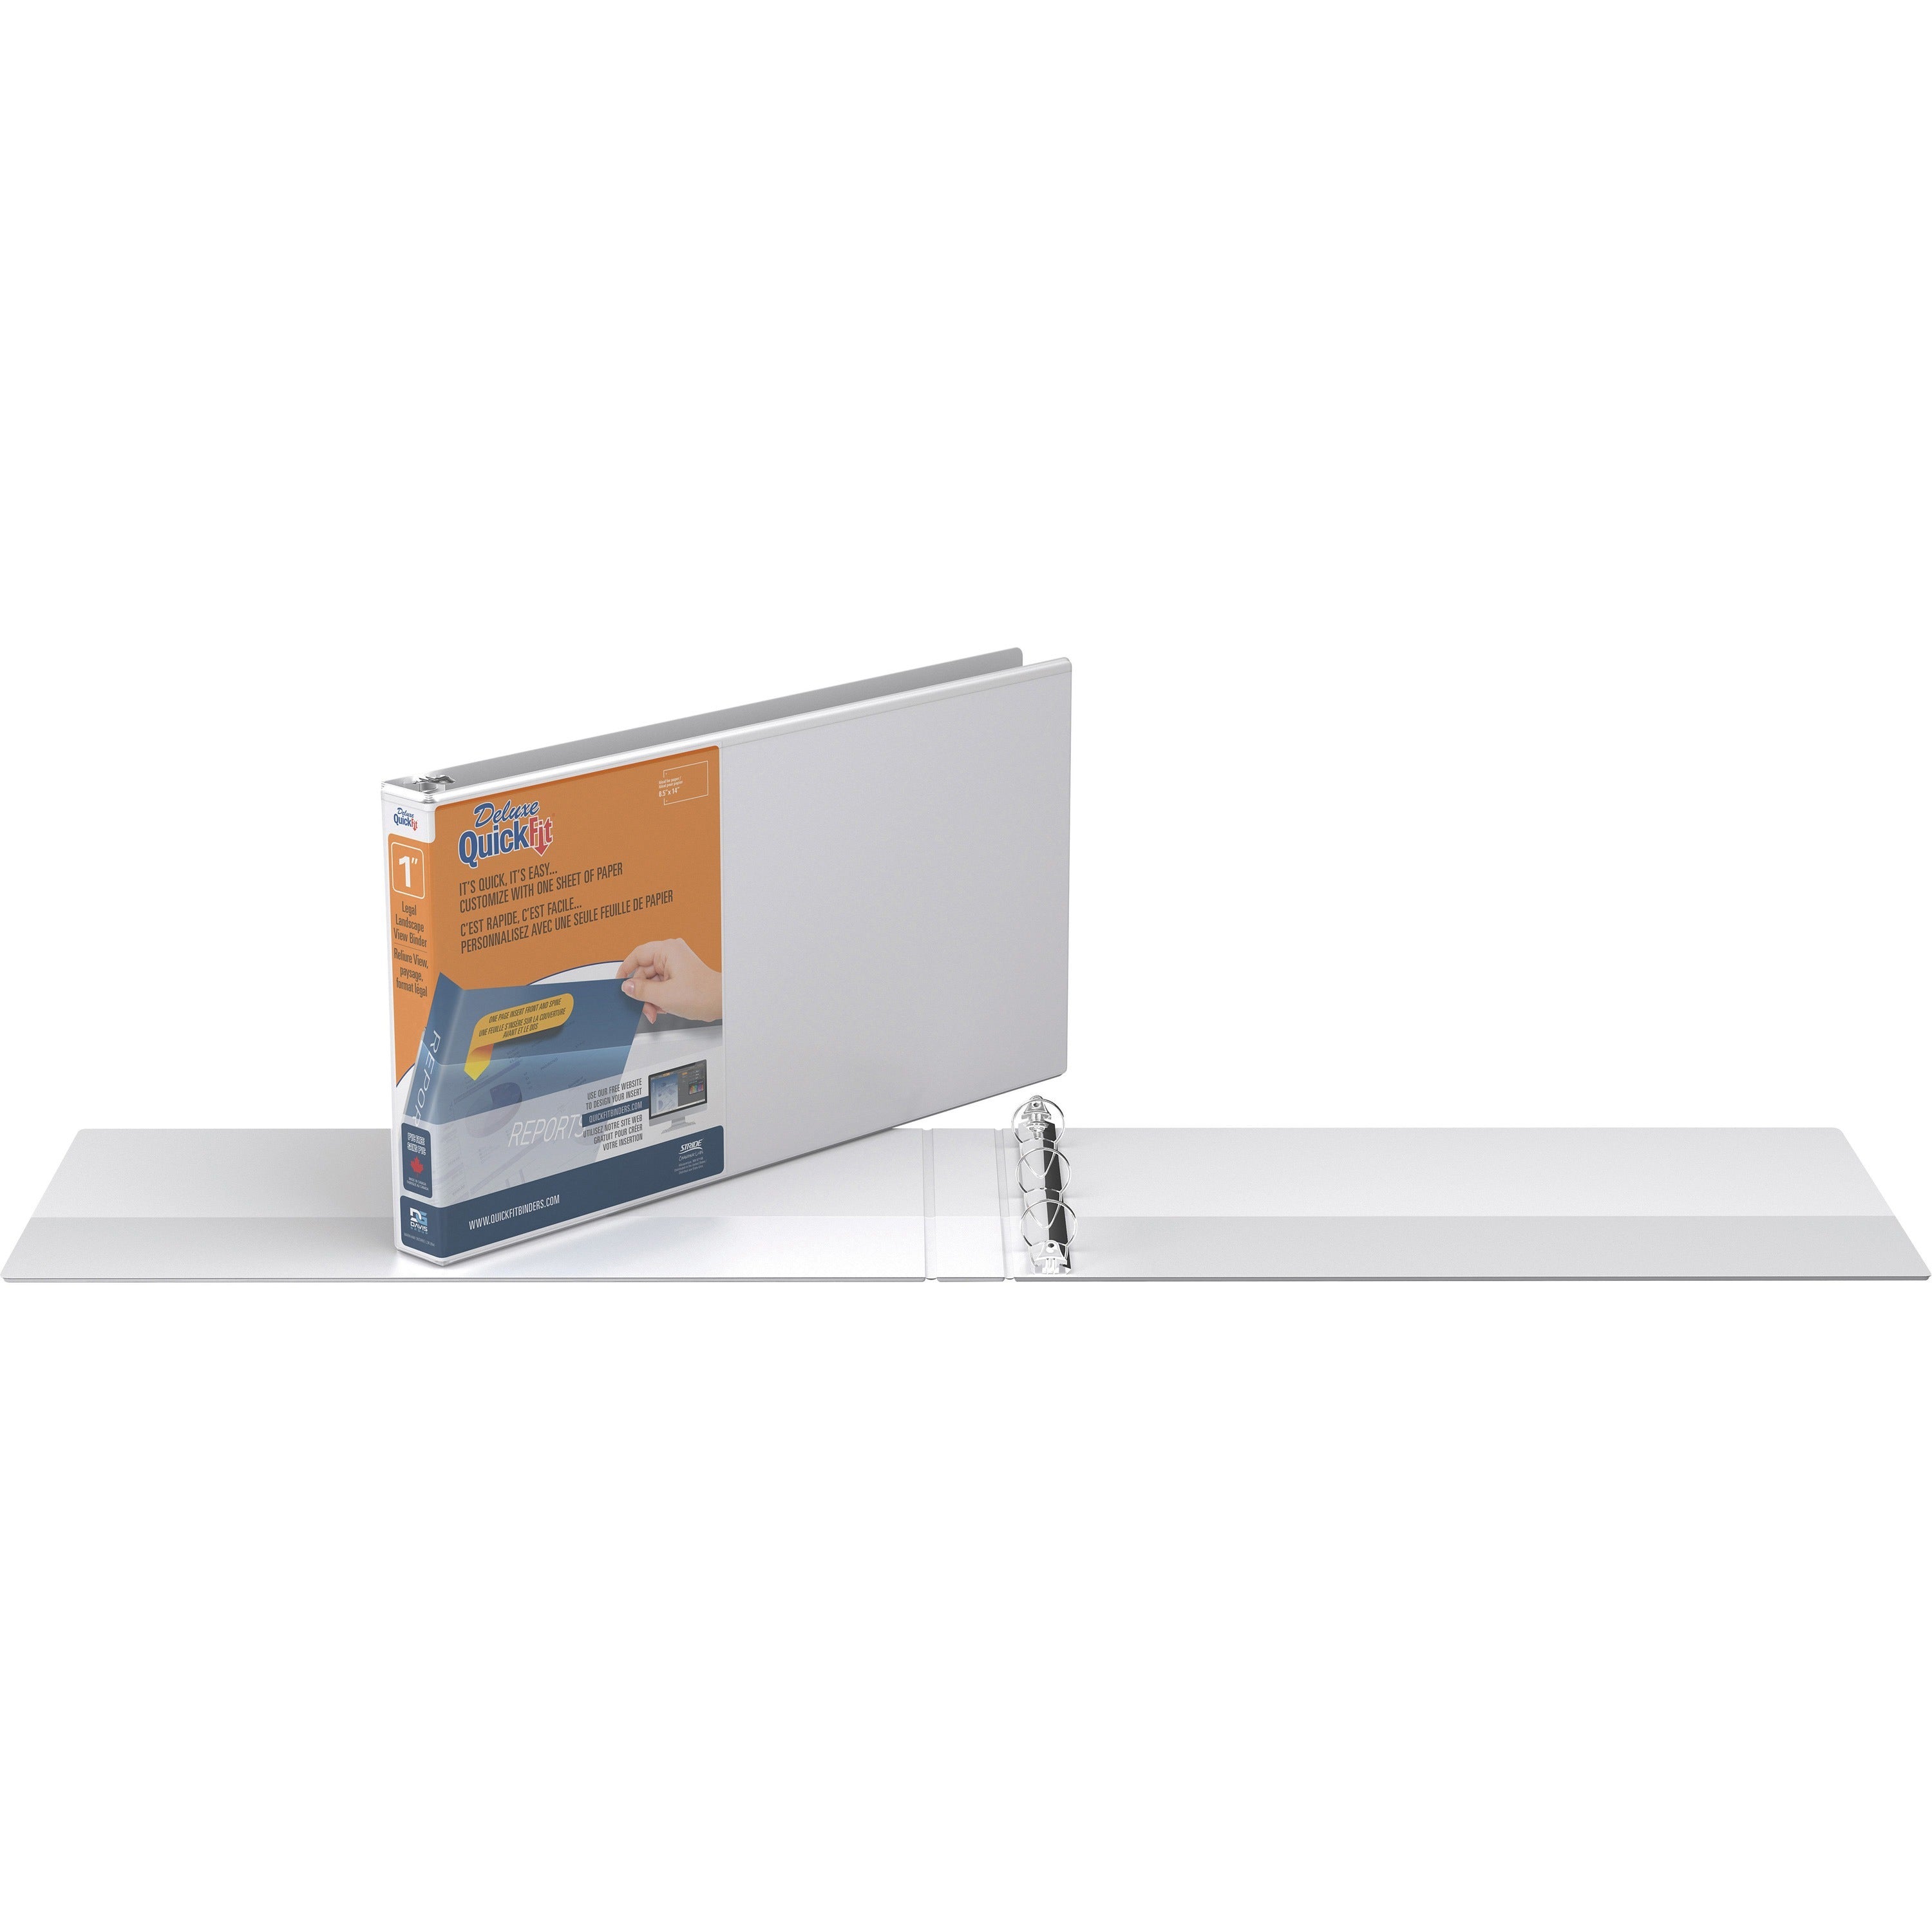 quickfit-ledger-binder-1-binder-capacity-legal-8-1-2-x-14-sheet-size-200-sheet-capacity-round-ring-fasteners-2-internal-pockets-polypropylene-white-recycled-spine-ink-transfer-resistant-locking-ring-heavy-duty-exposed-r_stw95010l - 1